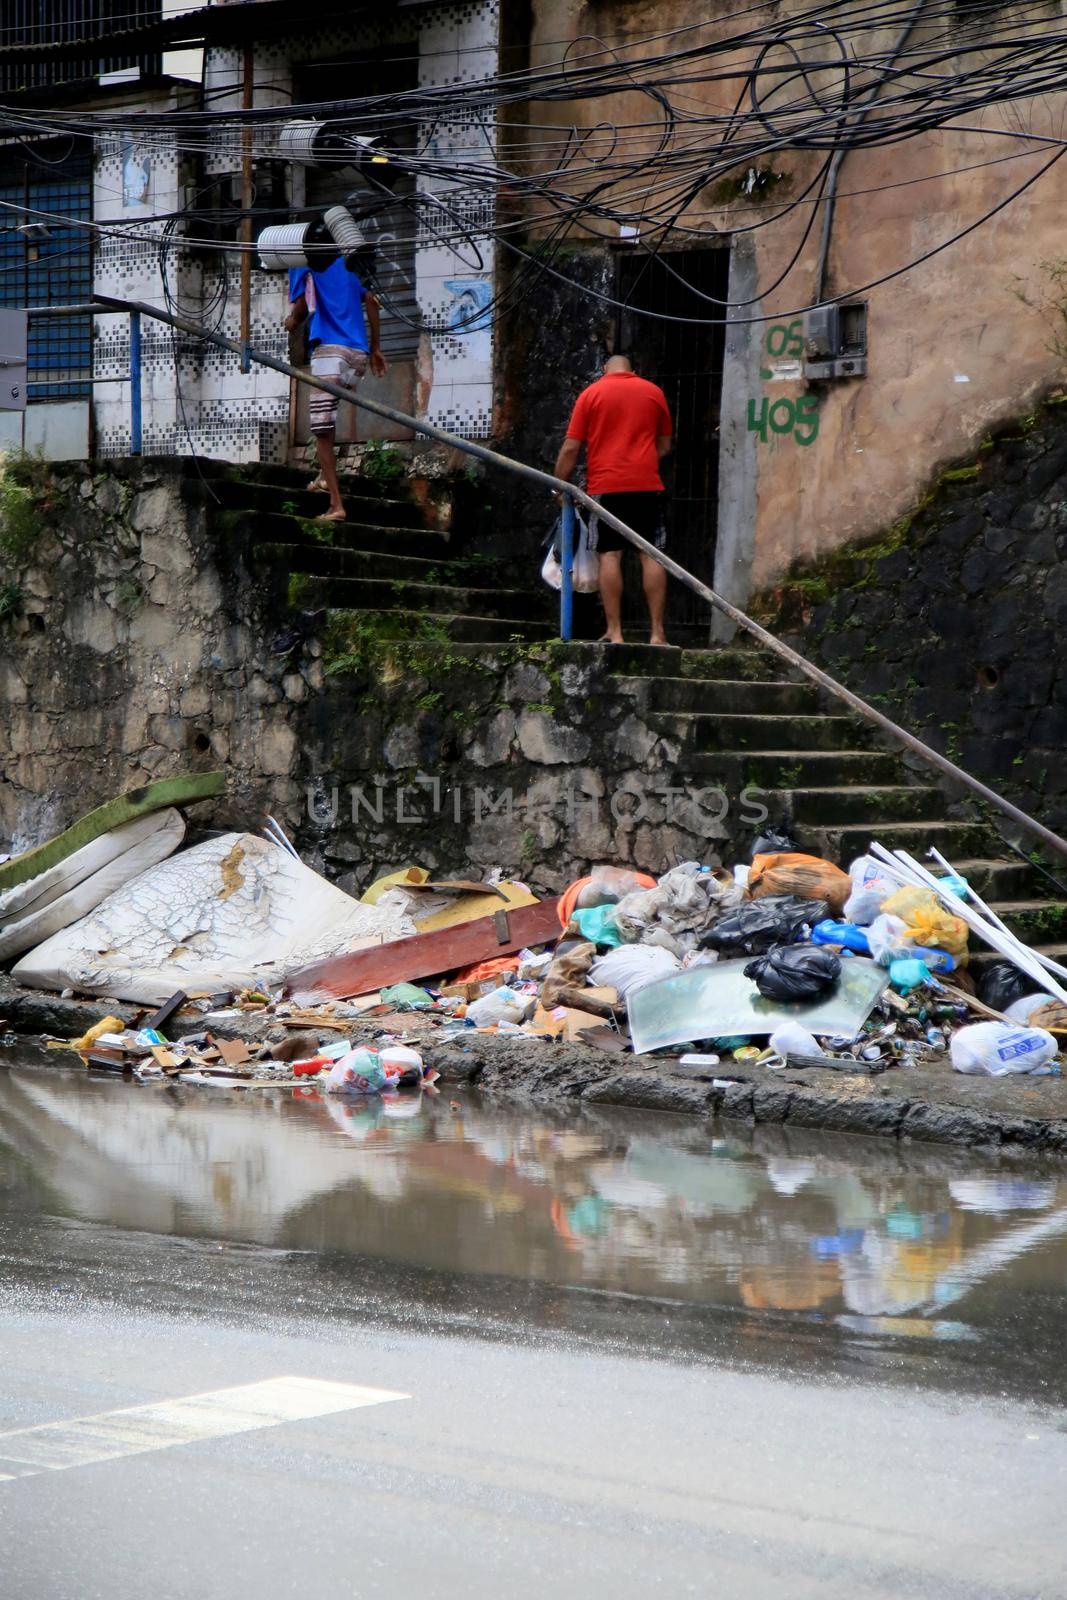 salvador, bahia, brazil - july 2, 2021: accumulated garbage on a pedestrian street in Salvador city.